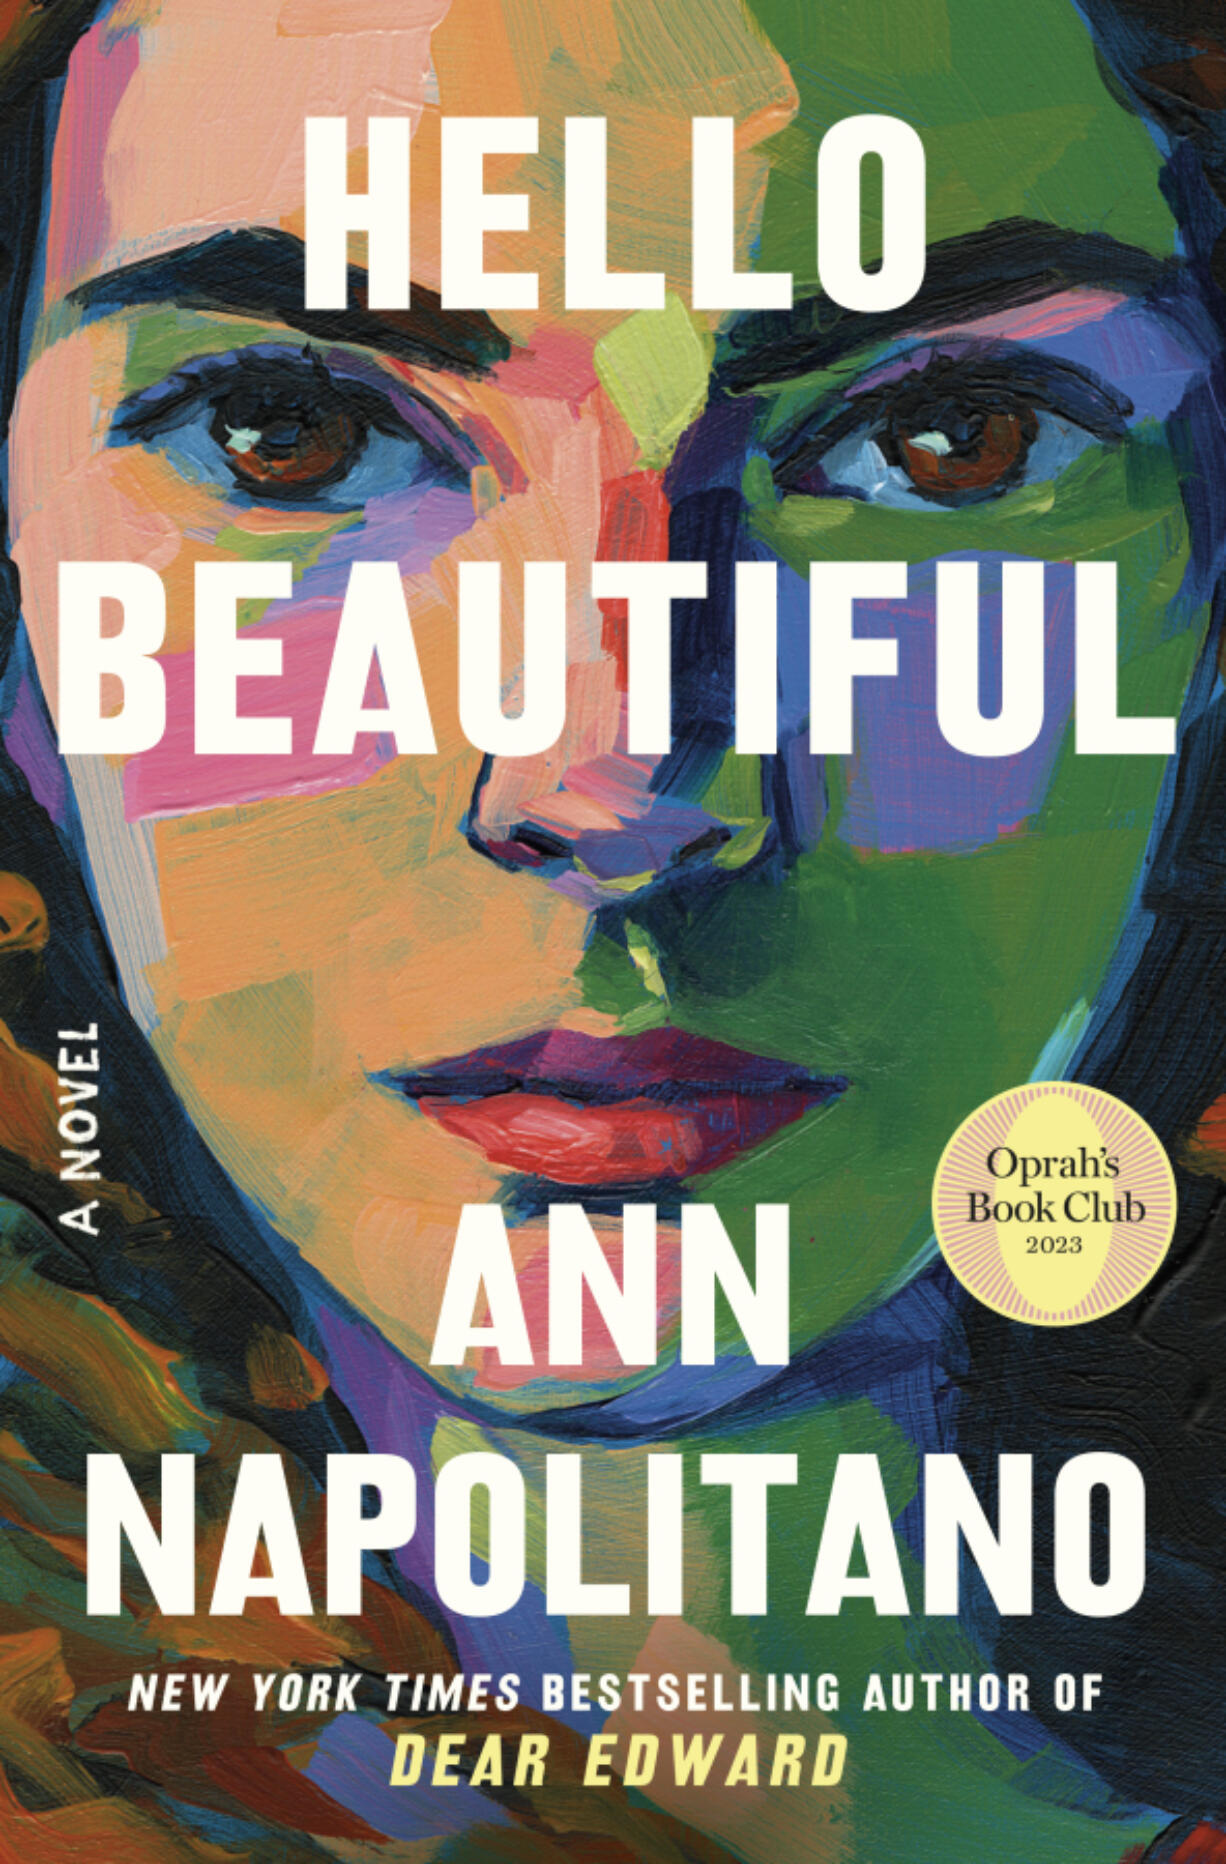 This cover image released by The Dial Press shows "Hello Beautiful" by Ann Napolitano. Oprah Winfrey announced that she had chosen Napolitano's book for her 100th book club pick.